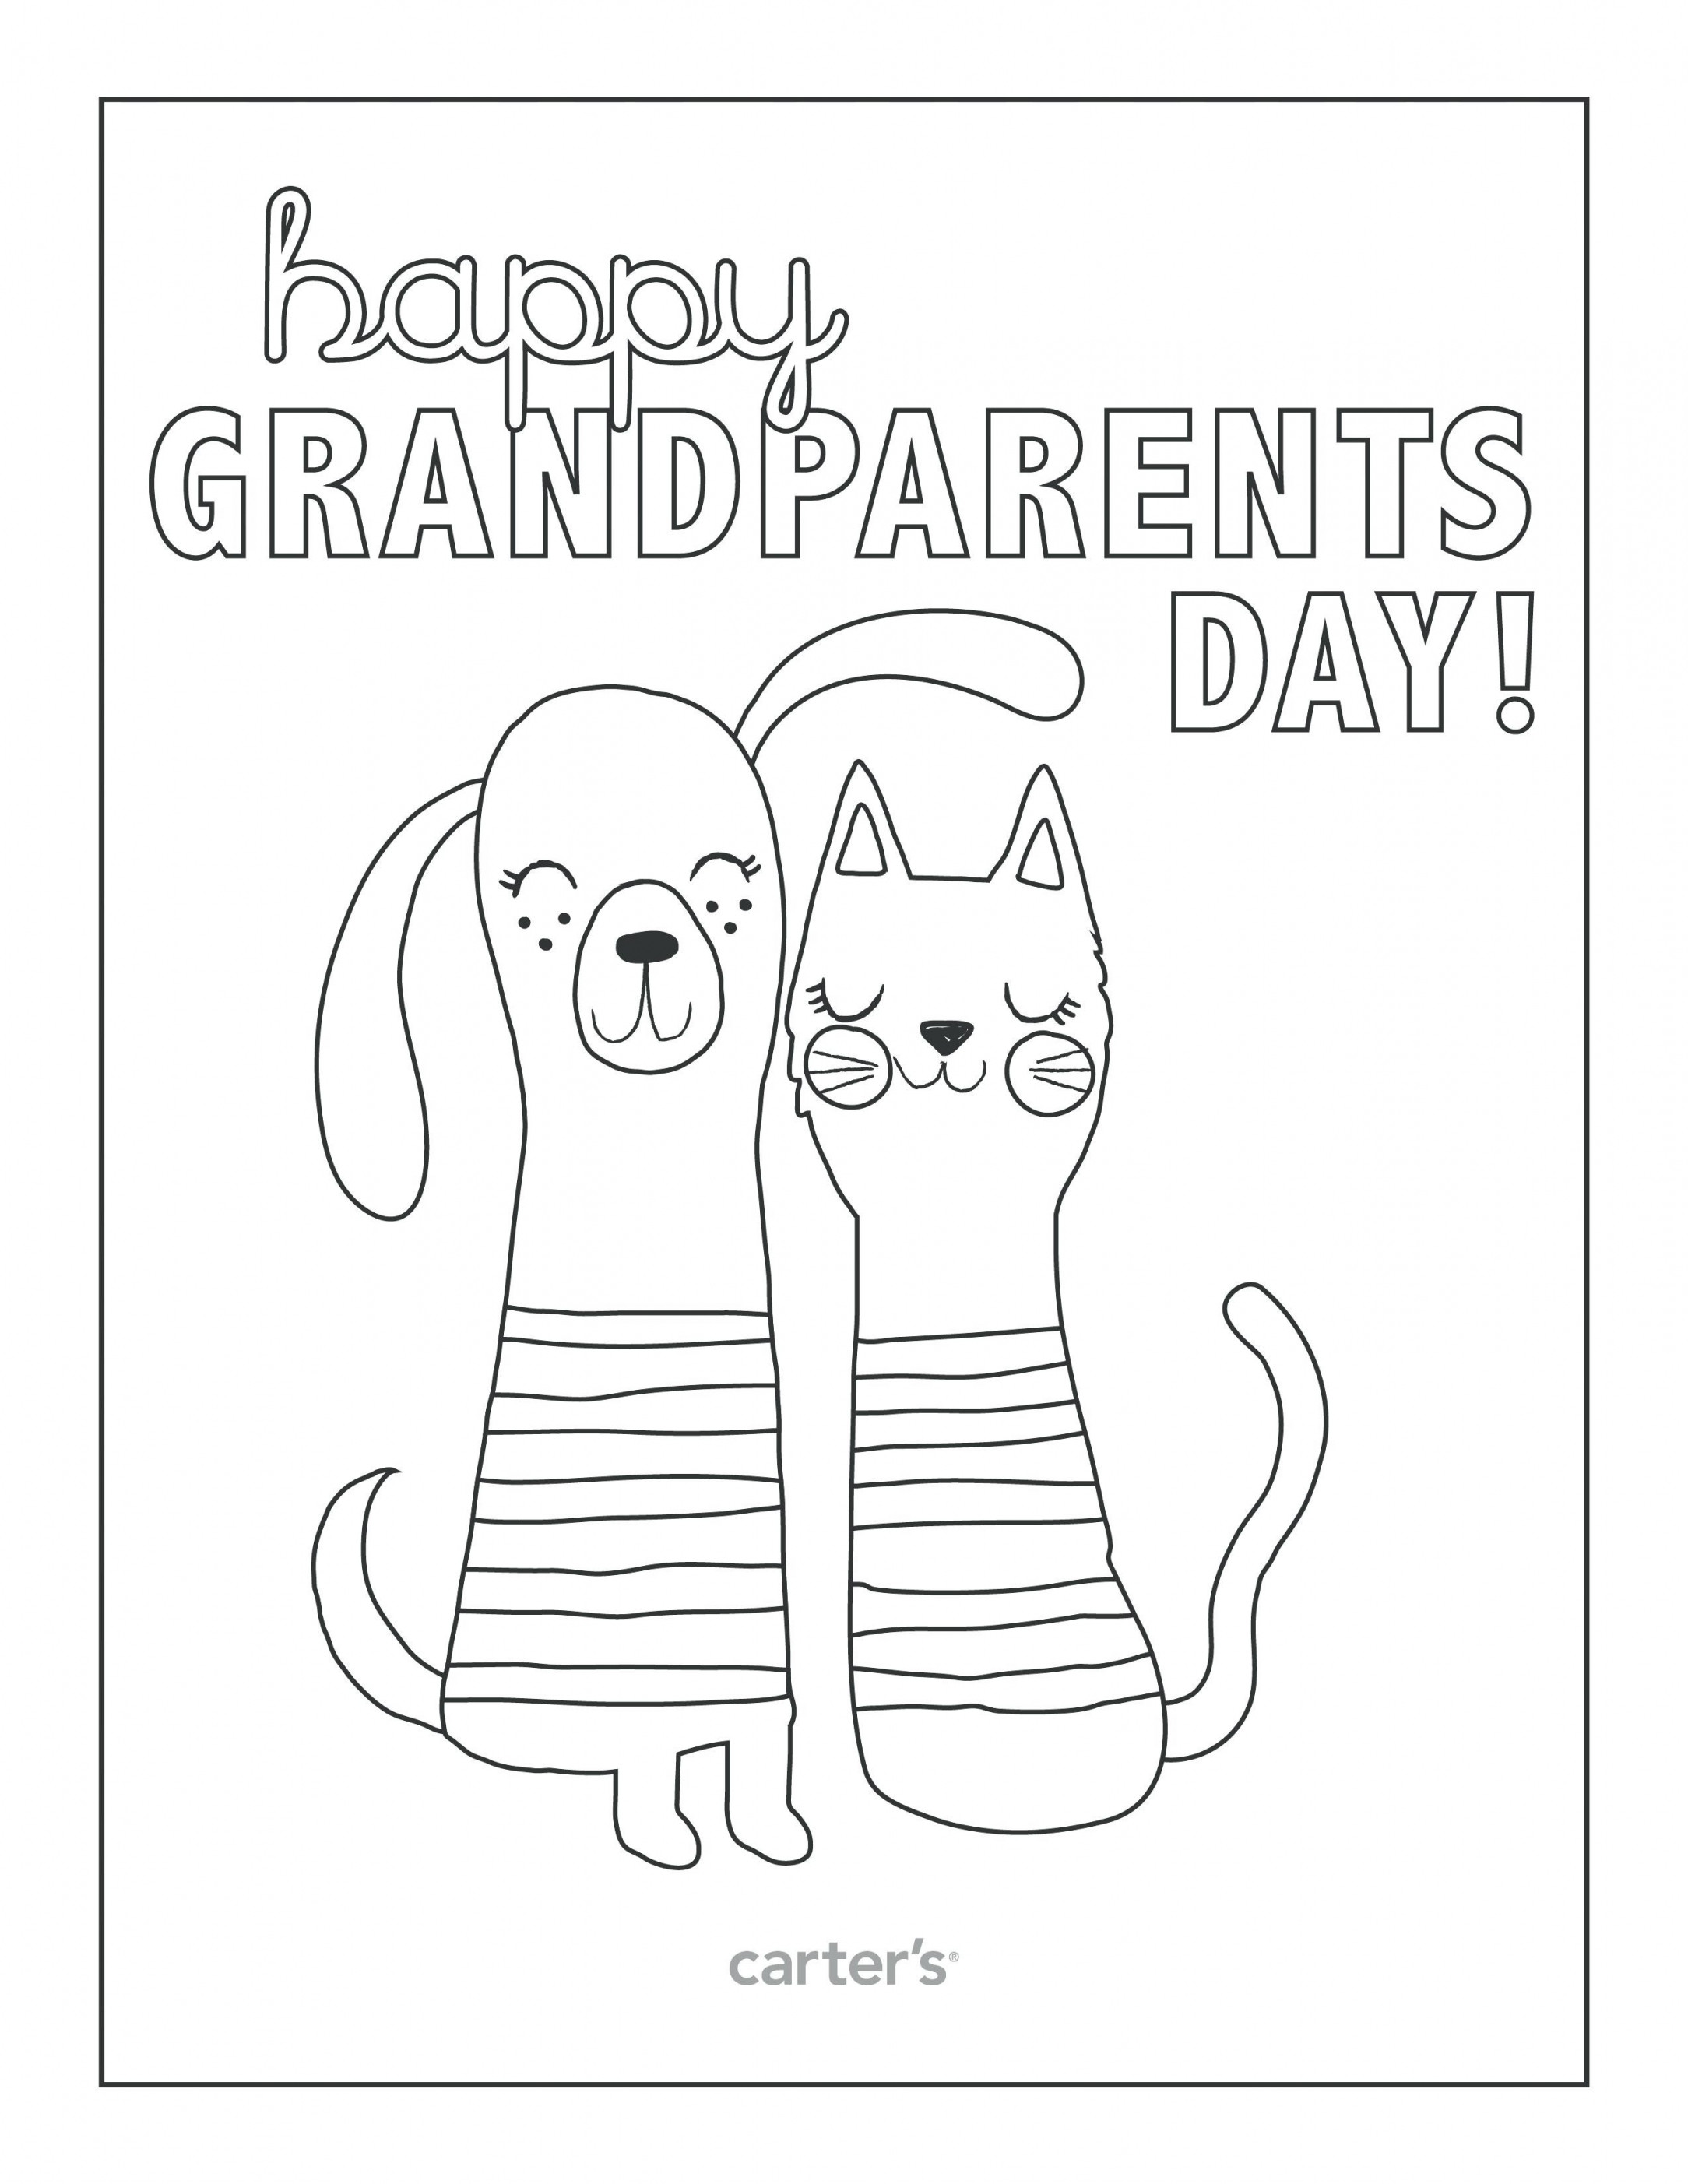 Free Coloring Pages Grandparents Day
 Grandparents Day Coloring Pages Best Coloring Pages For Kids